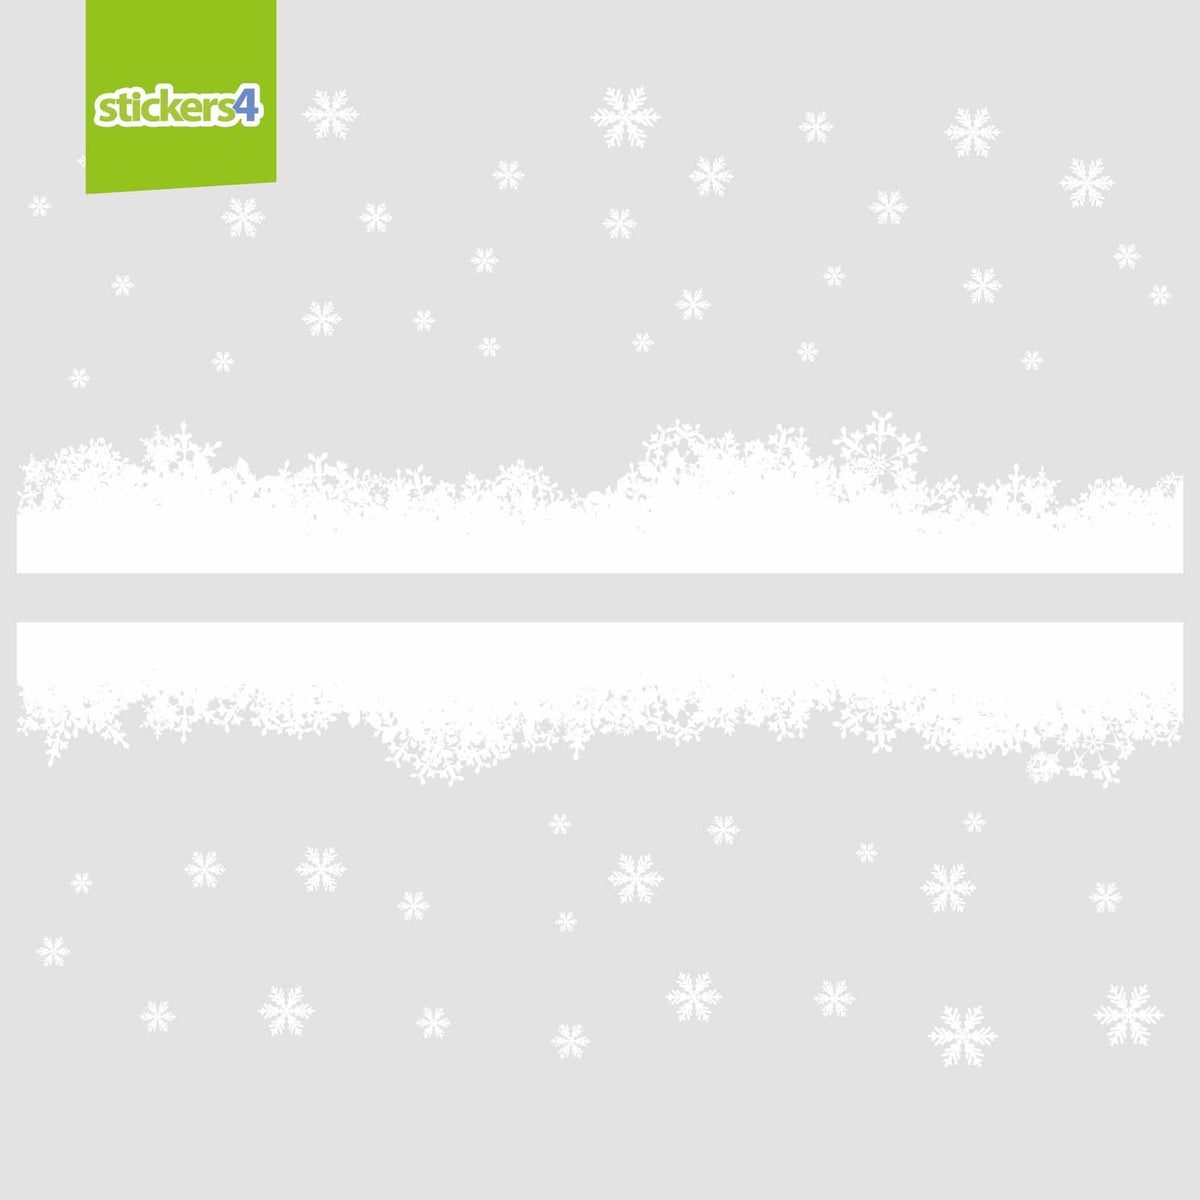 Fluffy Snow Effect Window Cling Border (2 Metre Total Length) Christmas Window Display